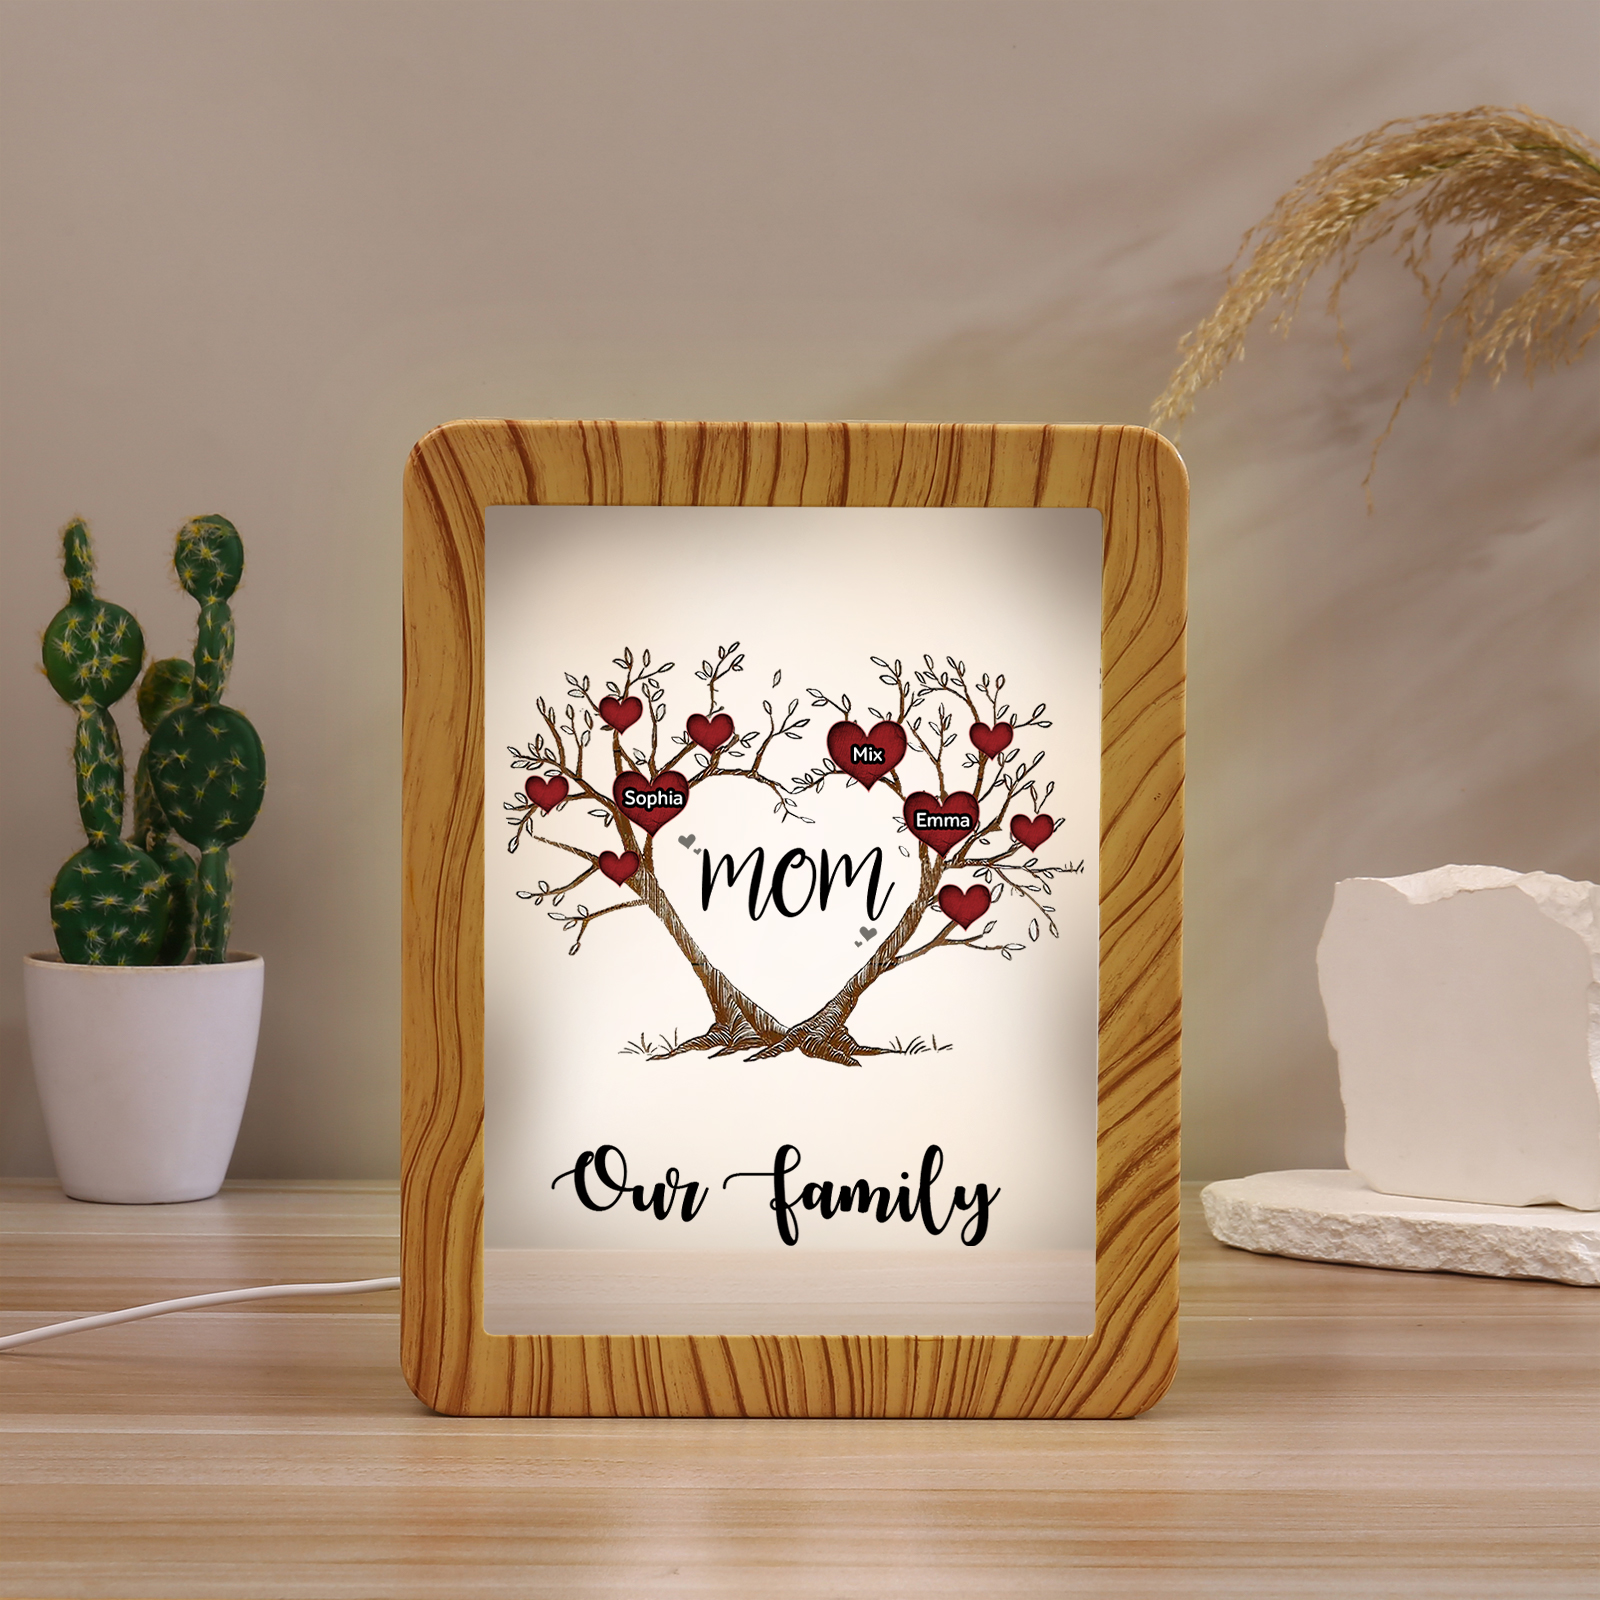 3 Names - Personalized Home Mirror Photo Frame Night Light Insert/Rechargeable Custom Text LED Night Light Gift for Mom